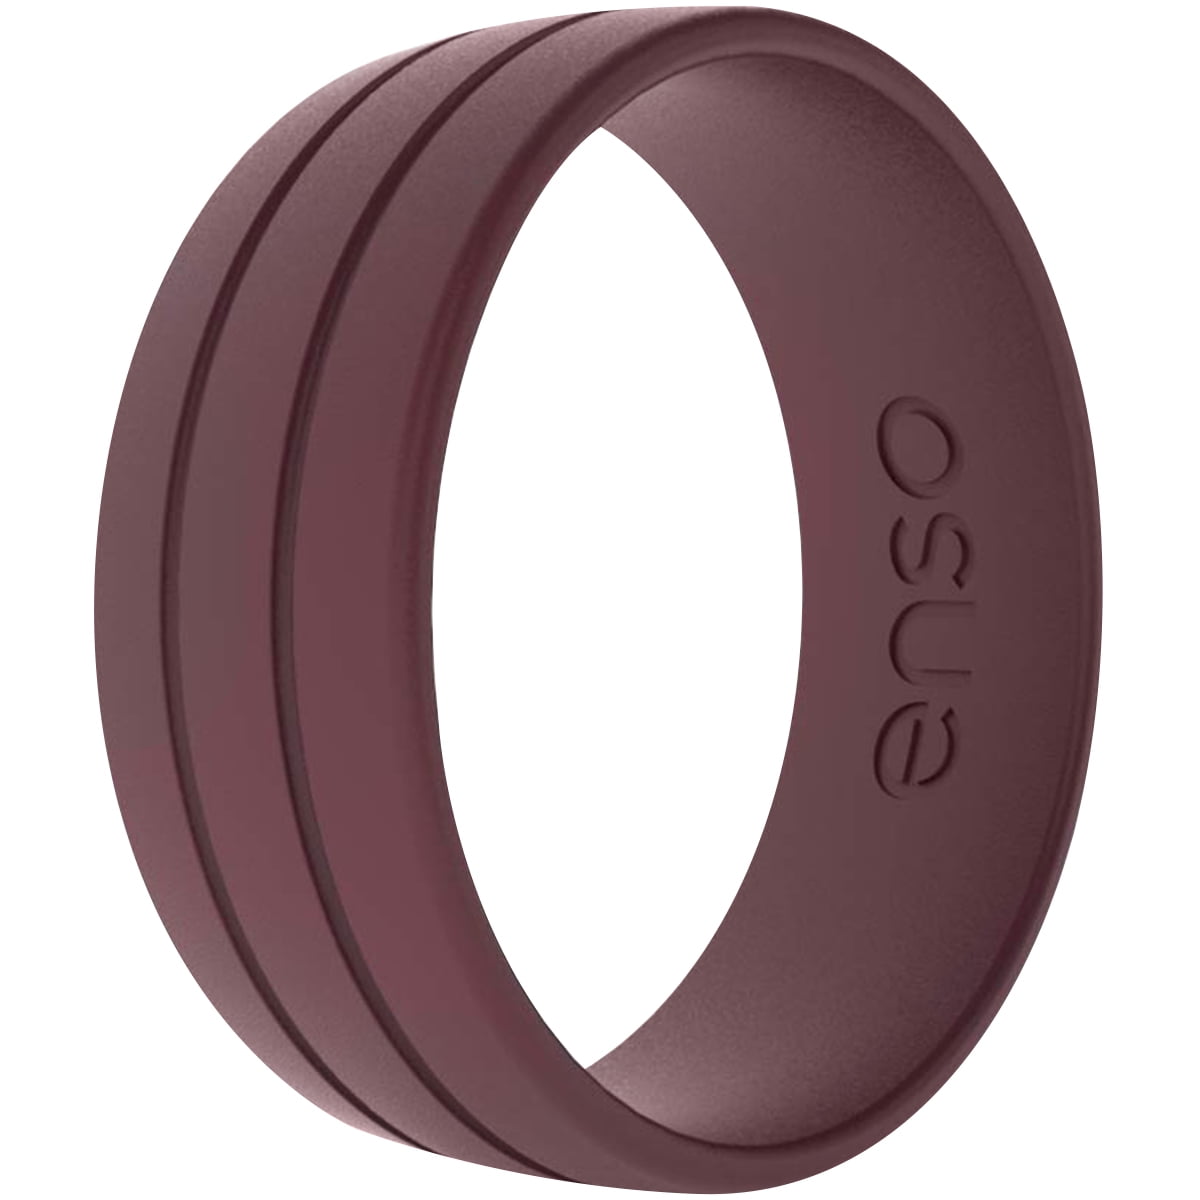 Enso Rings Ultralite Series Silicone Ring - Oxblood - 4